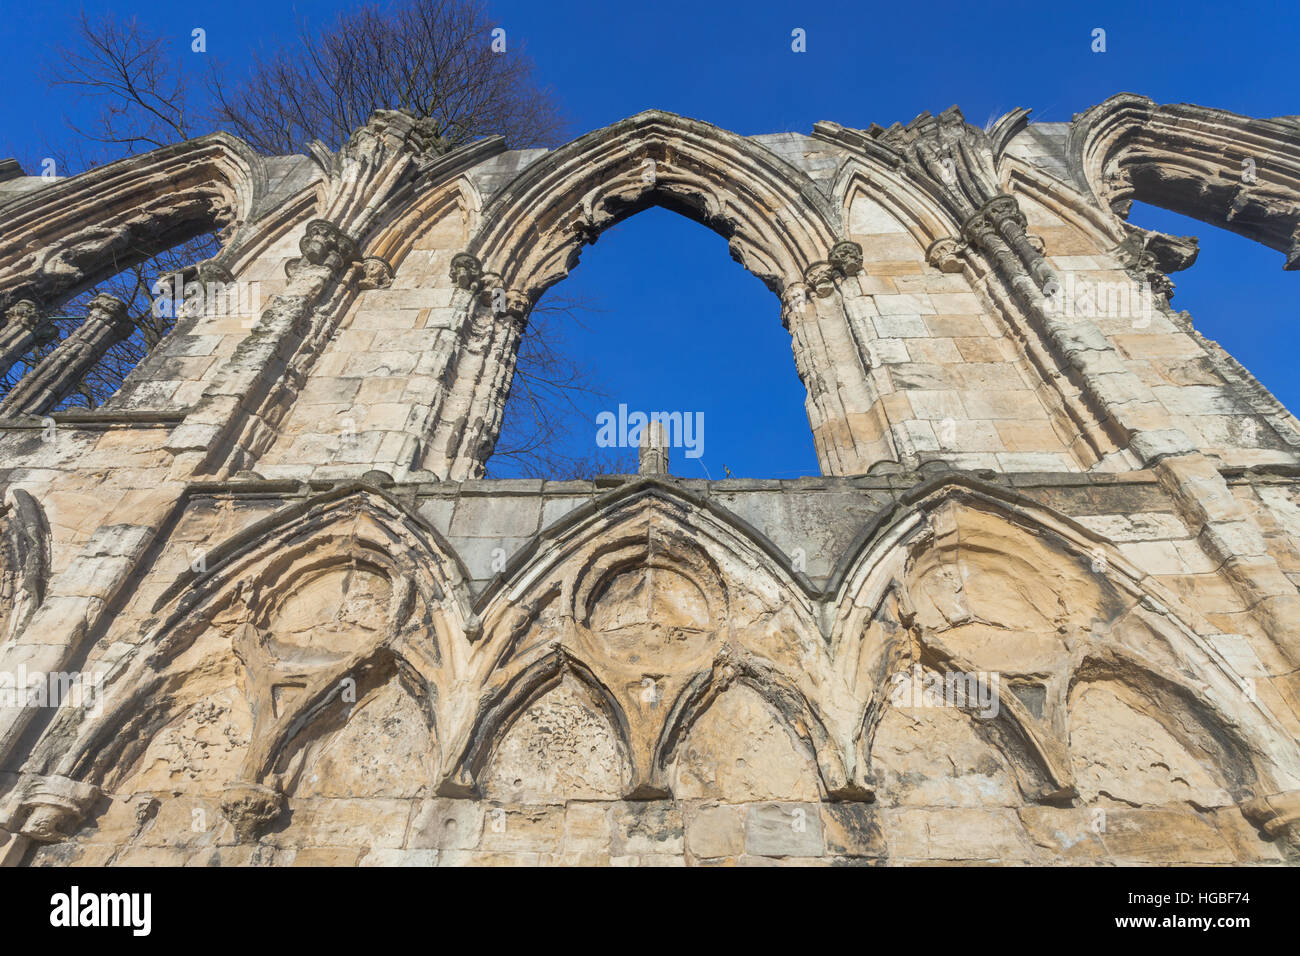 The Abbey of St Mary, a ruined Benedictine abbey in York, England and a Grade I listed building UK Stock Photo